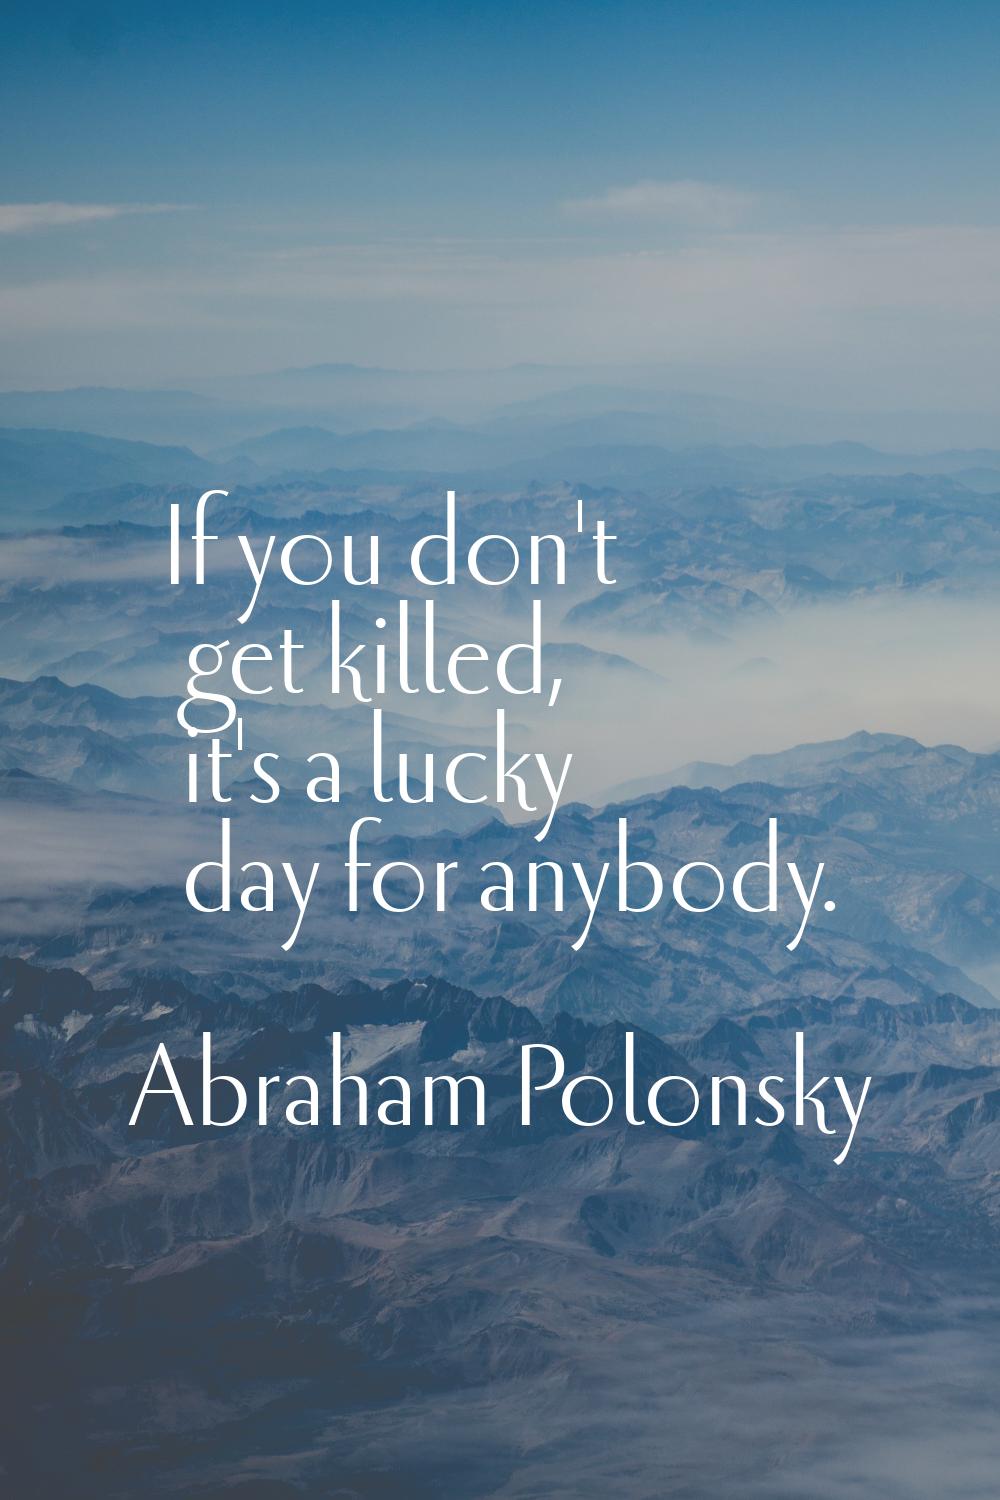 If you don't get killed, it's a lucky day for anybody.